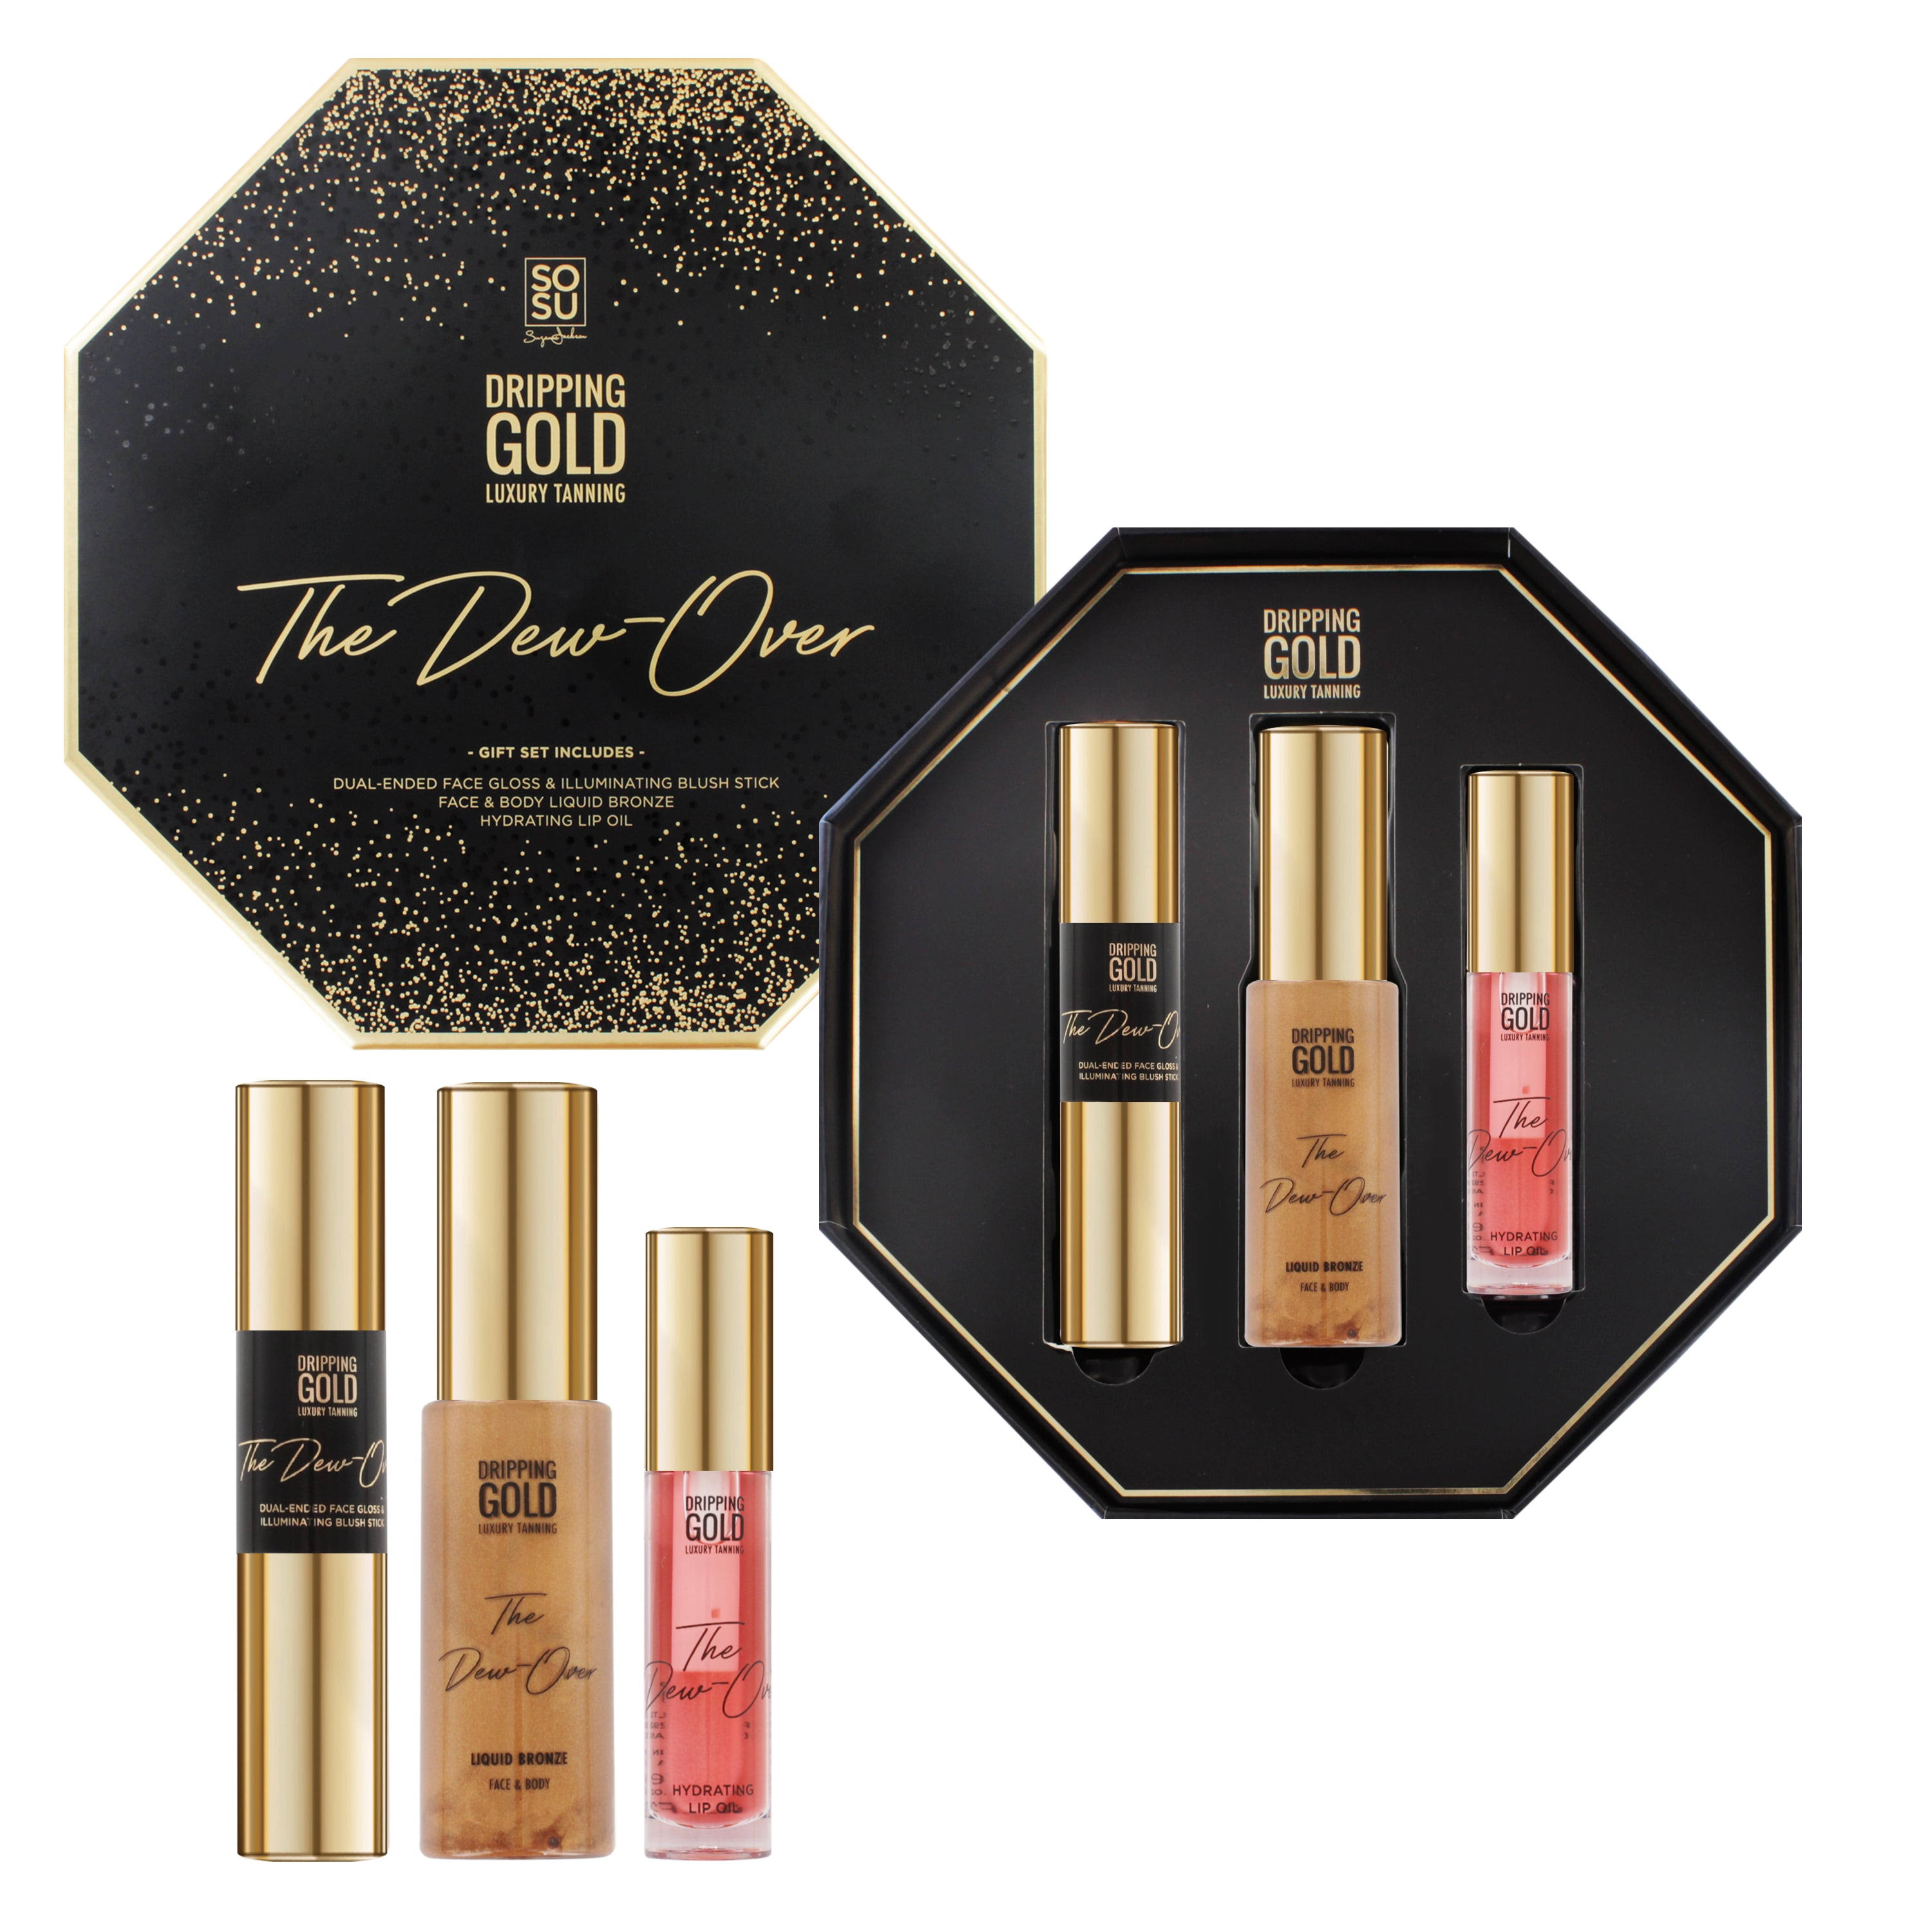 SOSU by Suzanne Jackson Dripping Gold The Dew-Over Gift Set